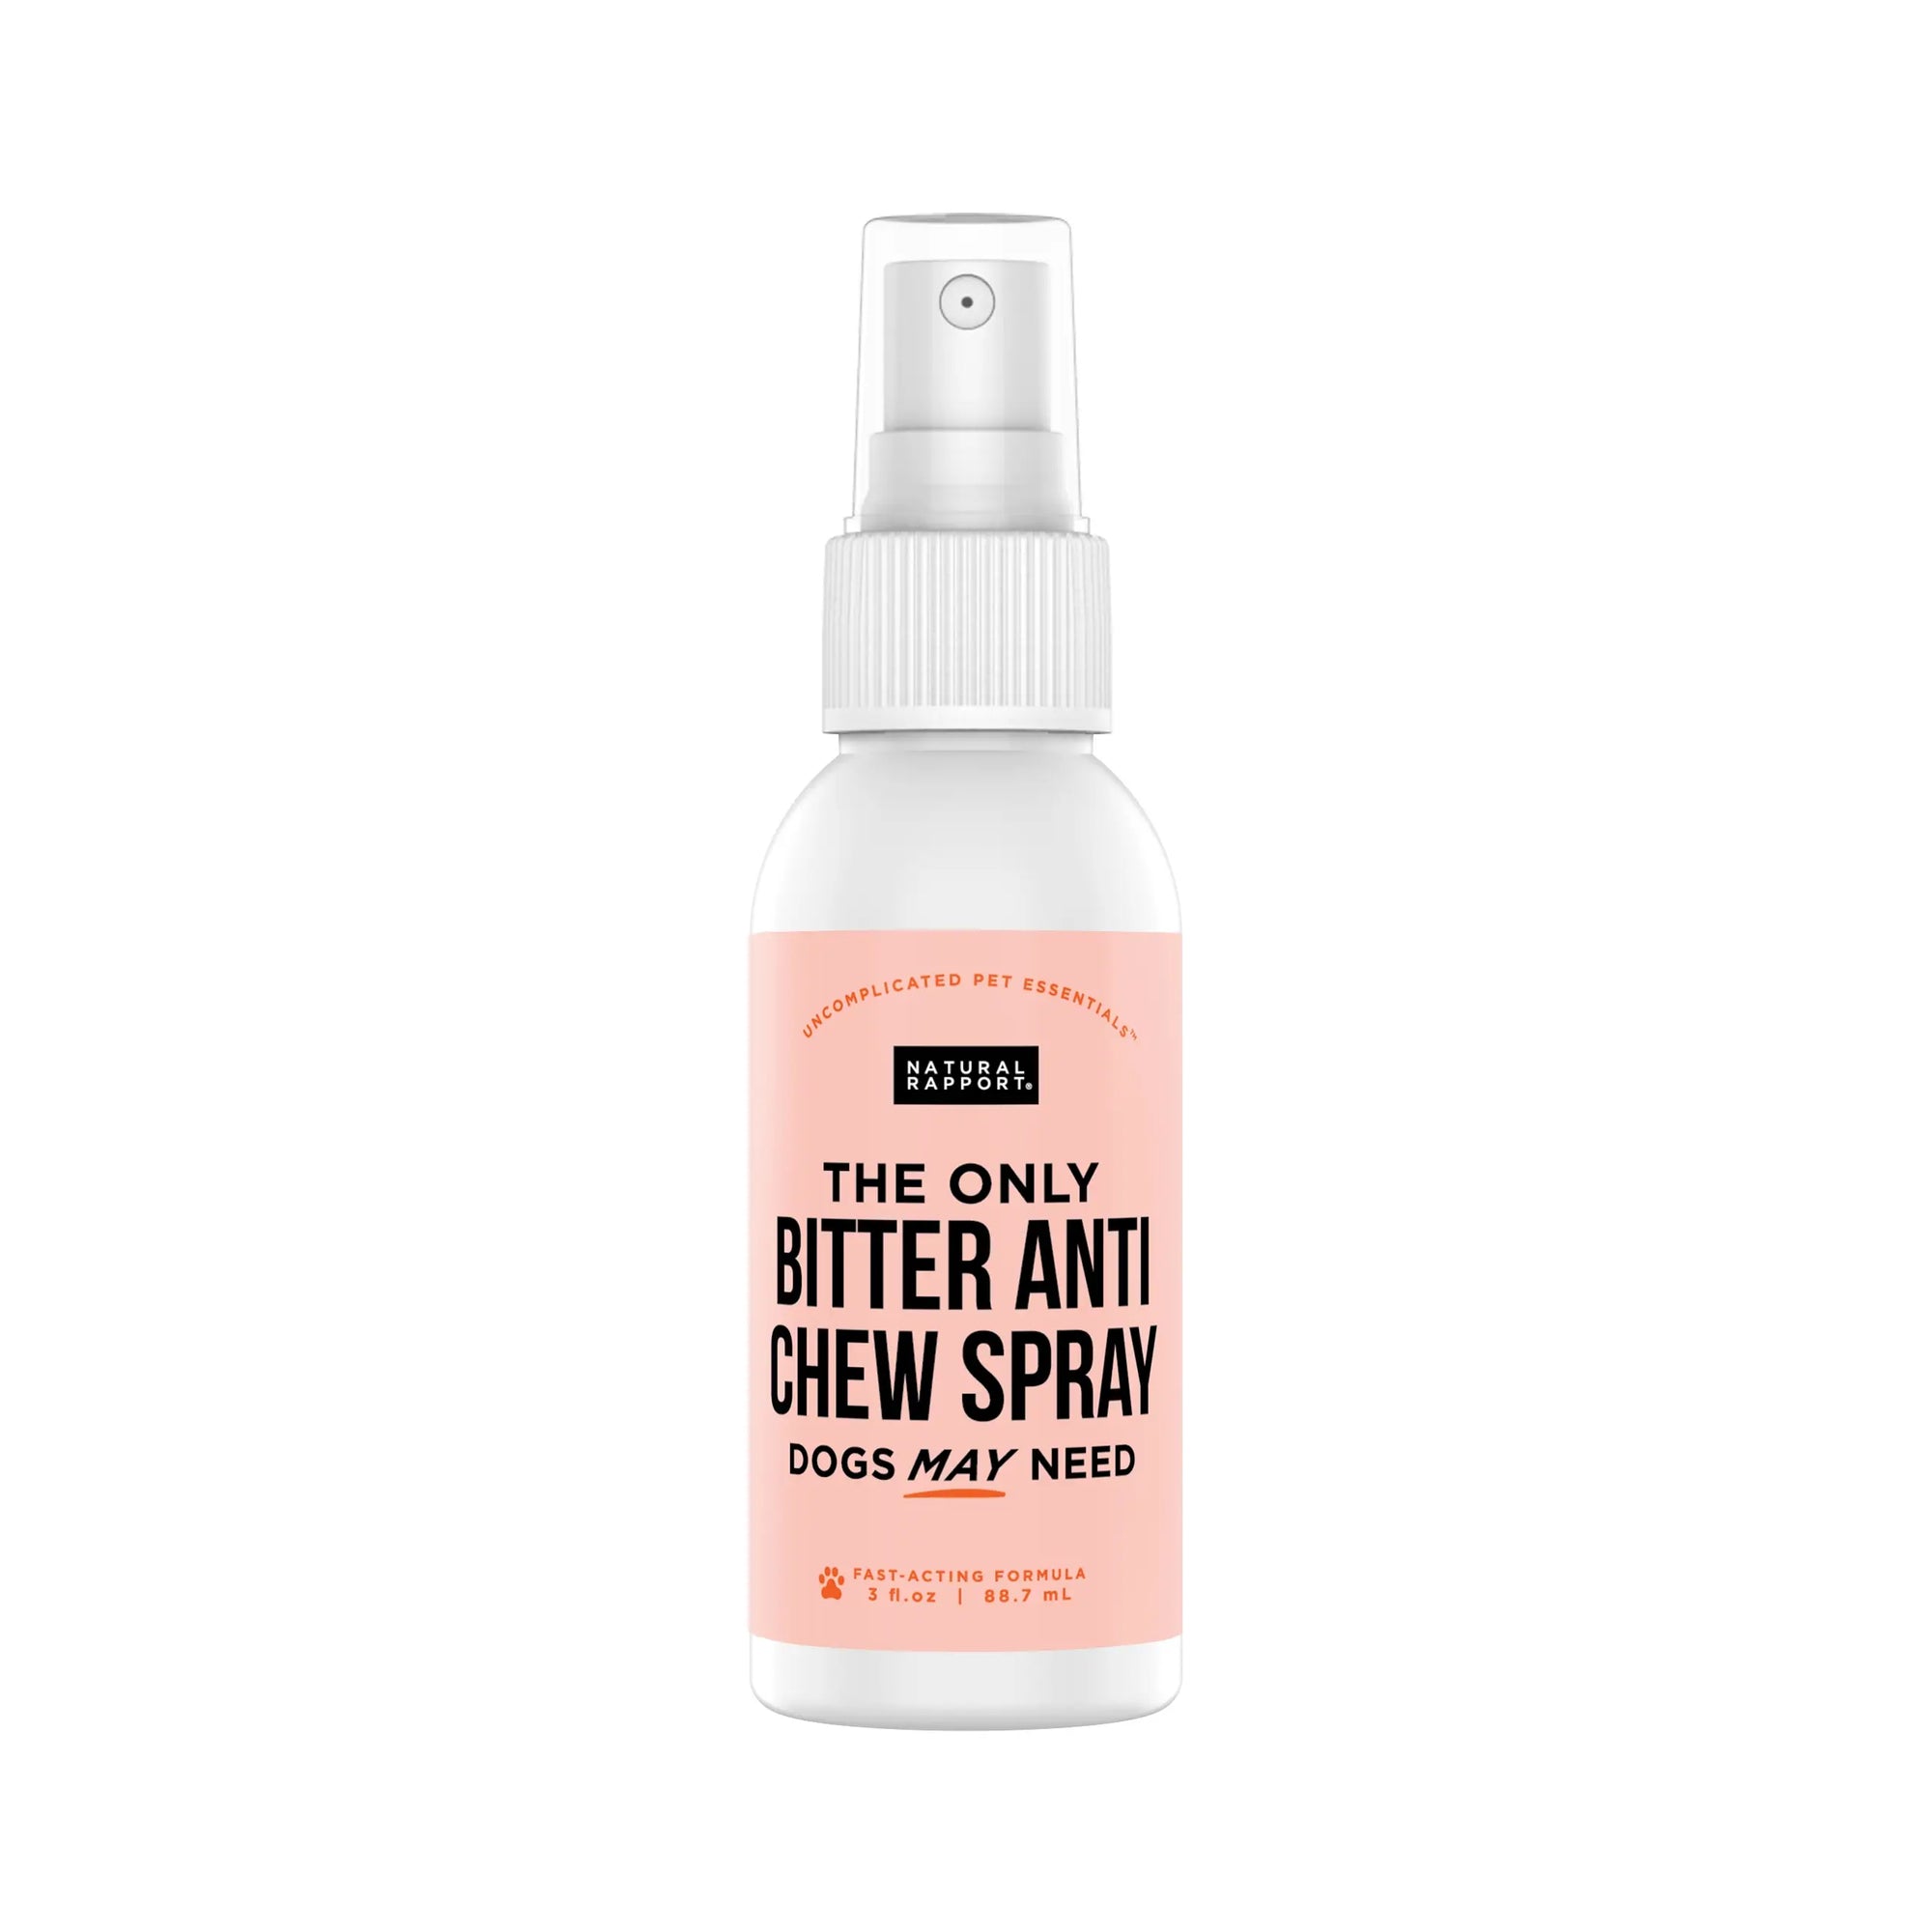 The Only Bitter Anti Chew Spray Dogs May Need